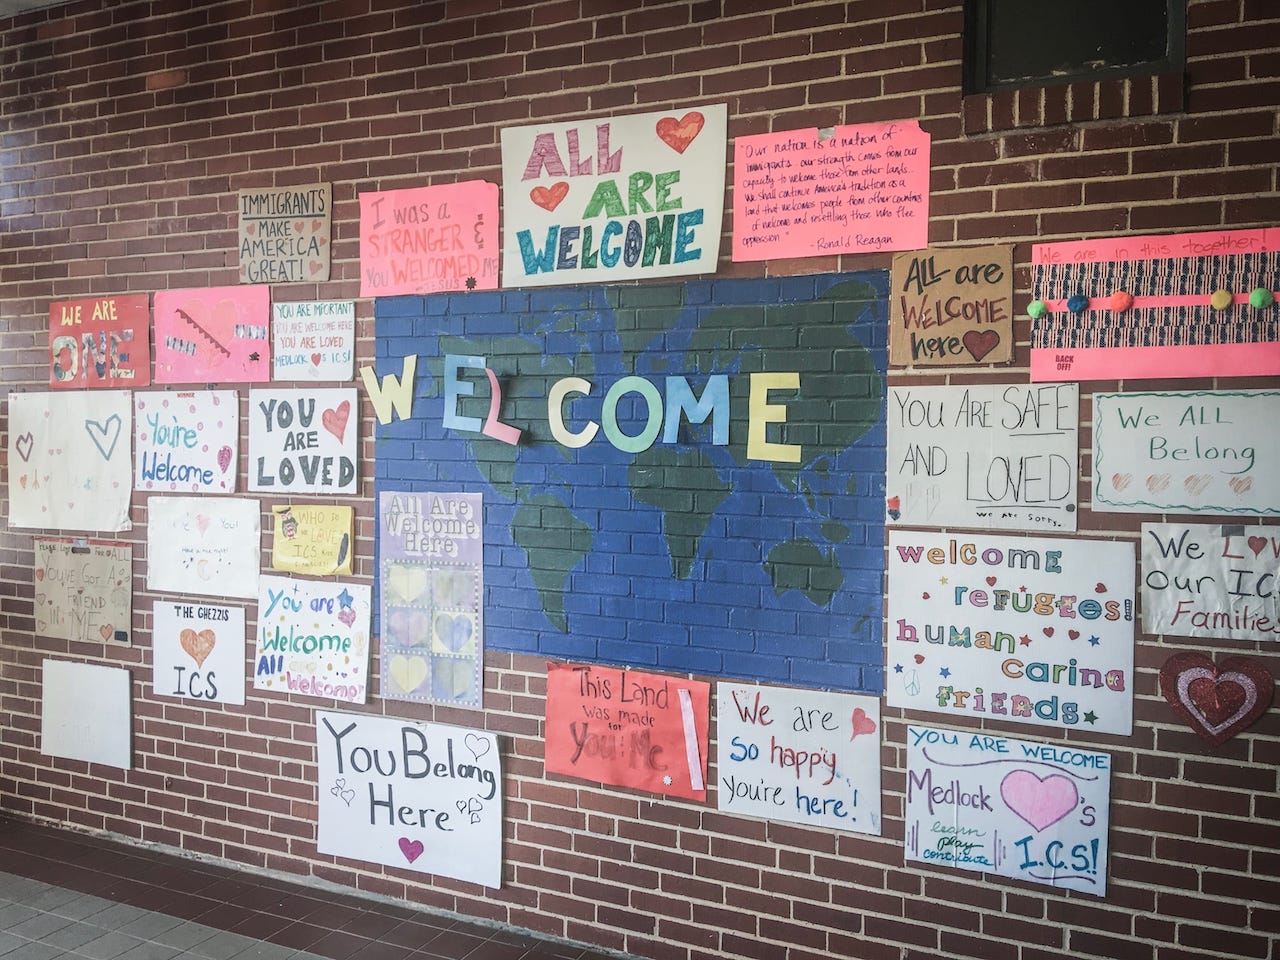 Handmade posters welcoming newcomers hang on a brick wall.